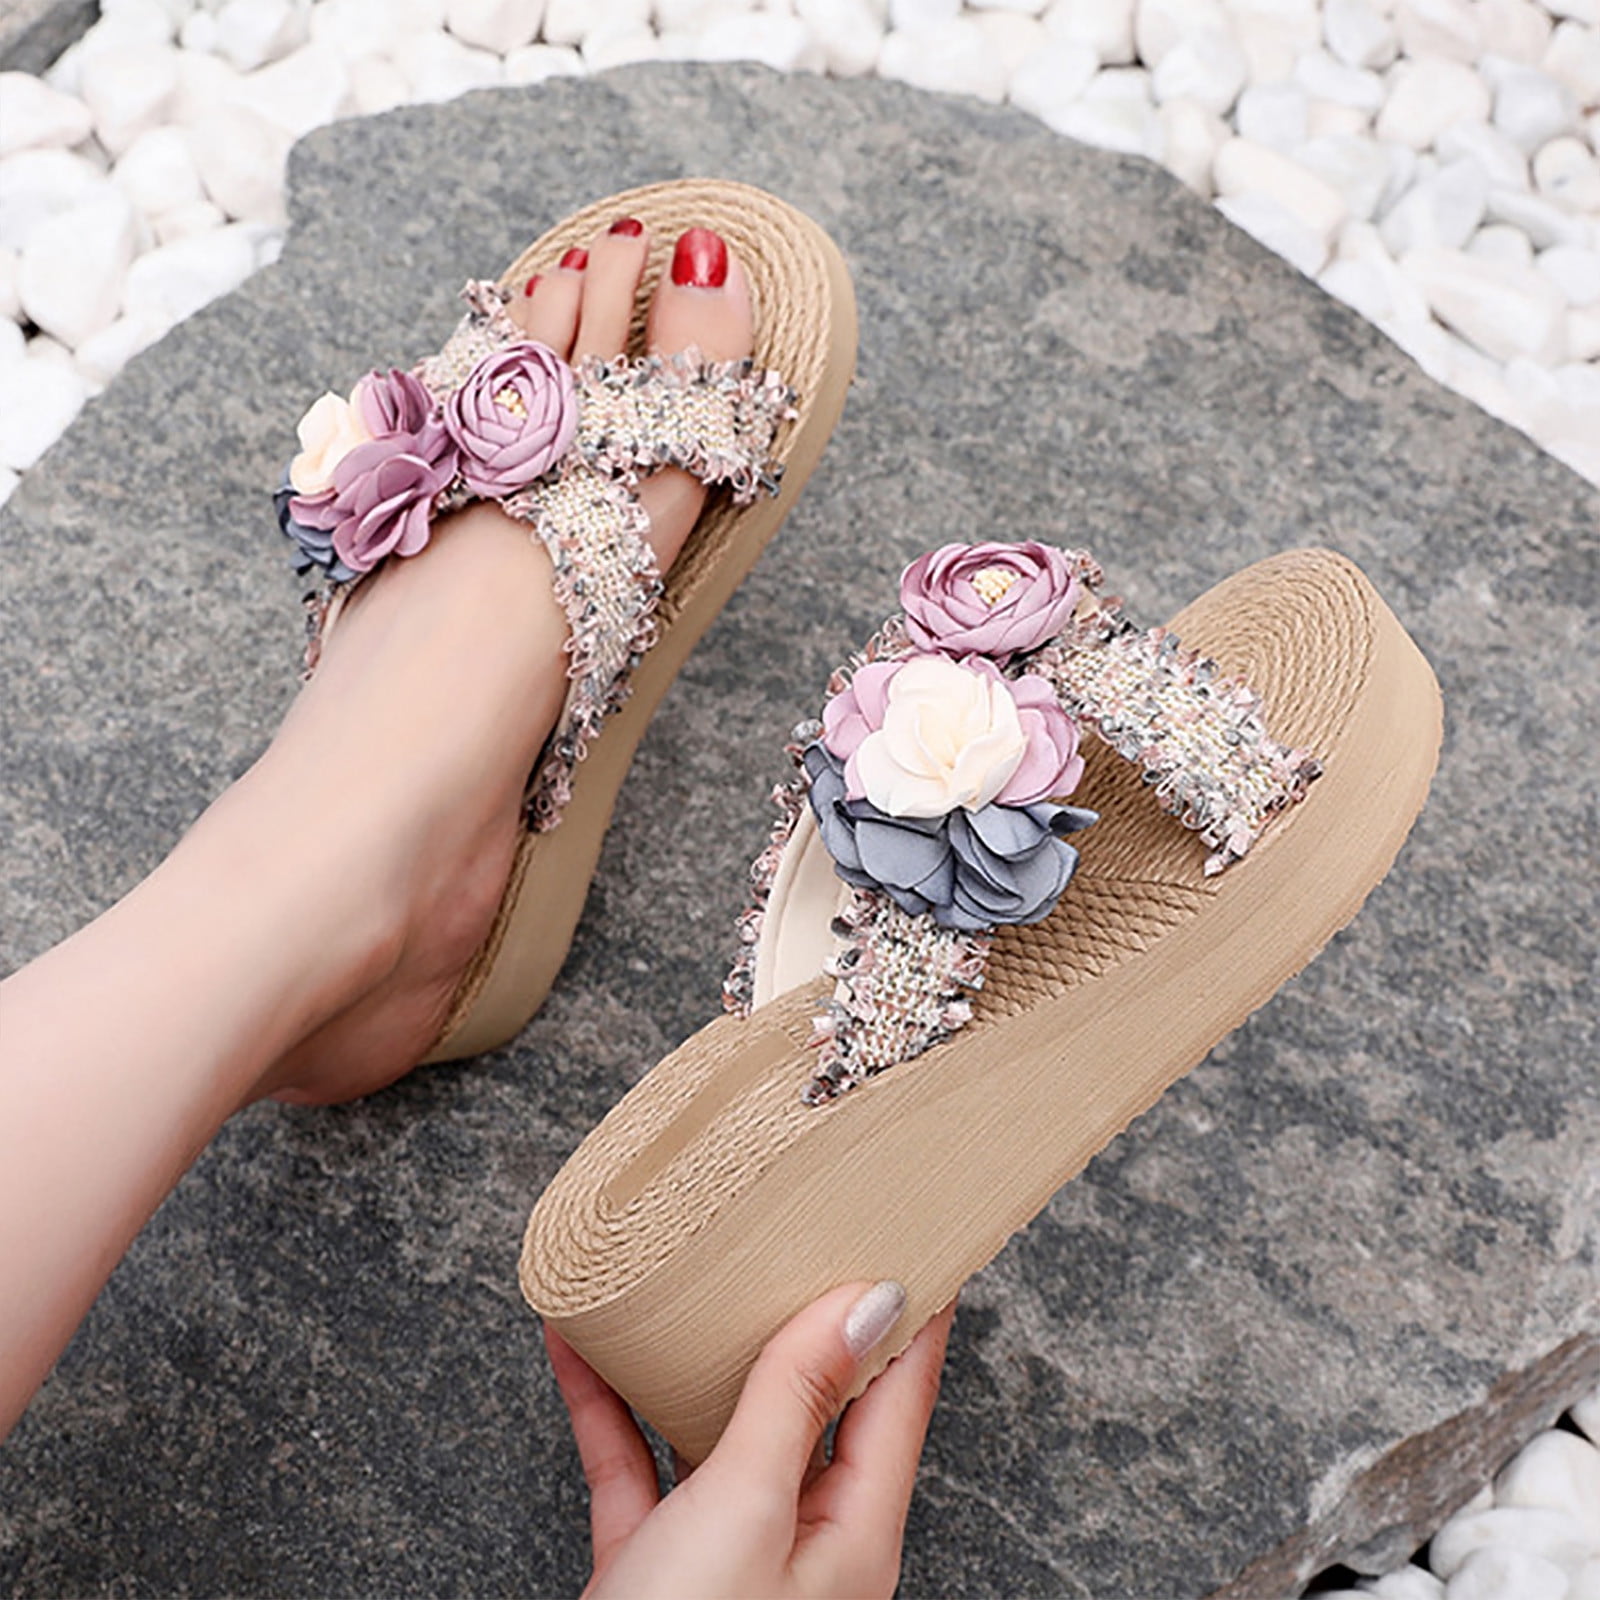 Trendy Shoes To Beat The Summer Heat (1) | Trending shoes, Womens summer  shoes, Fashion shoes sandals